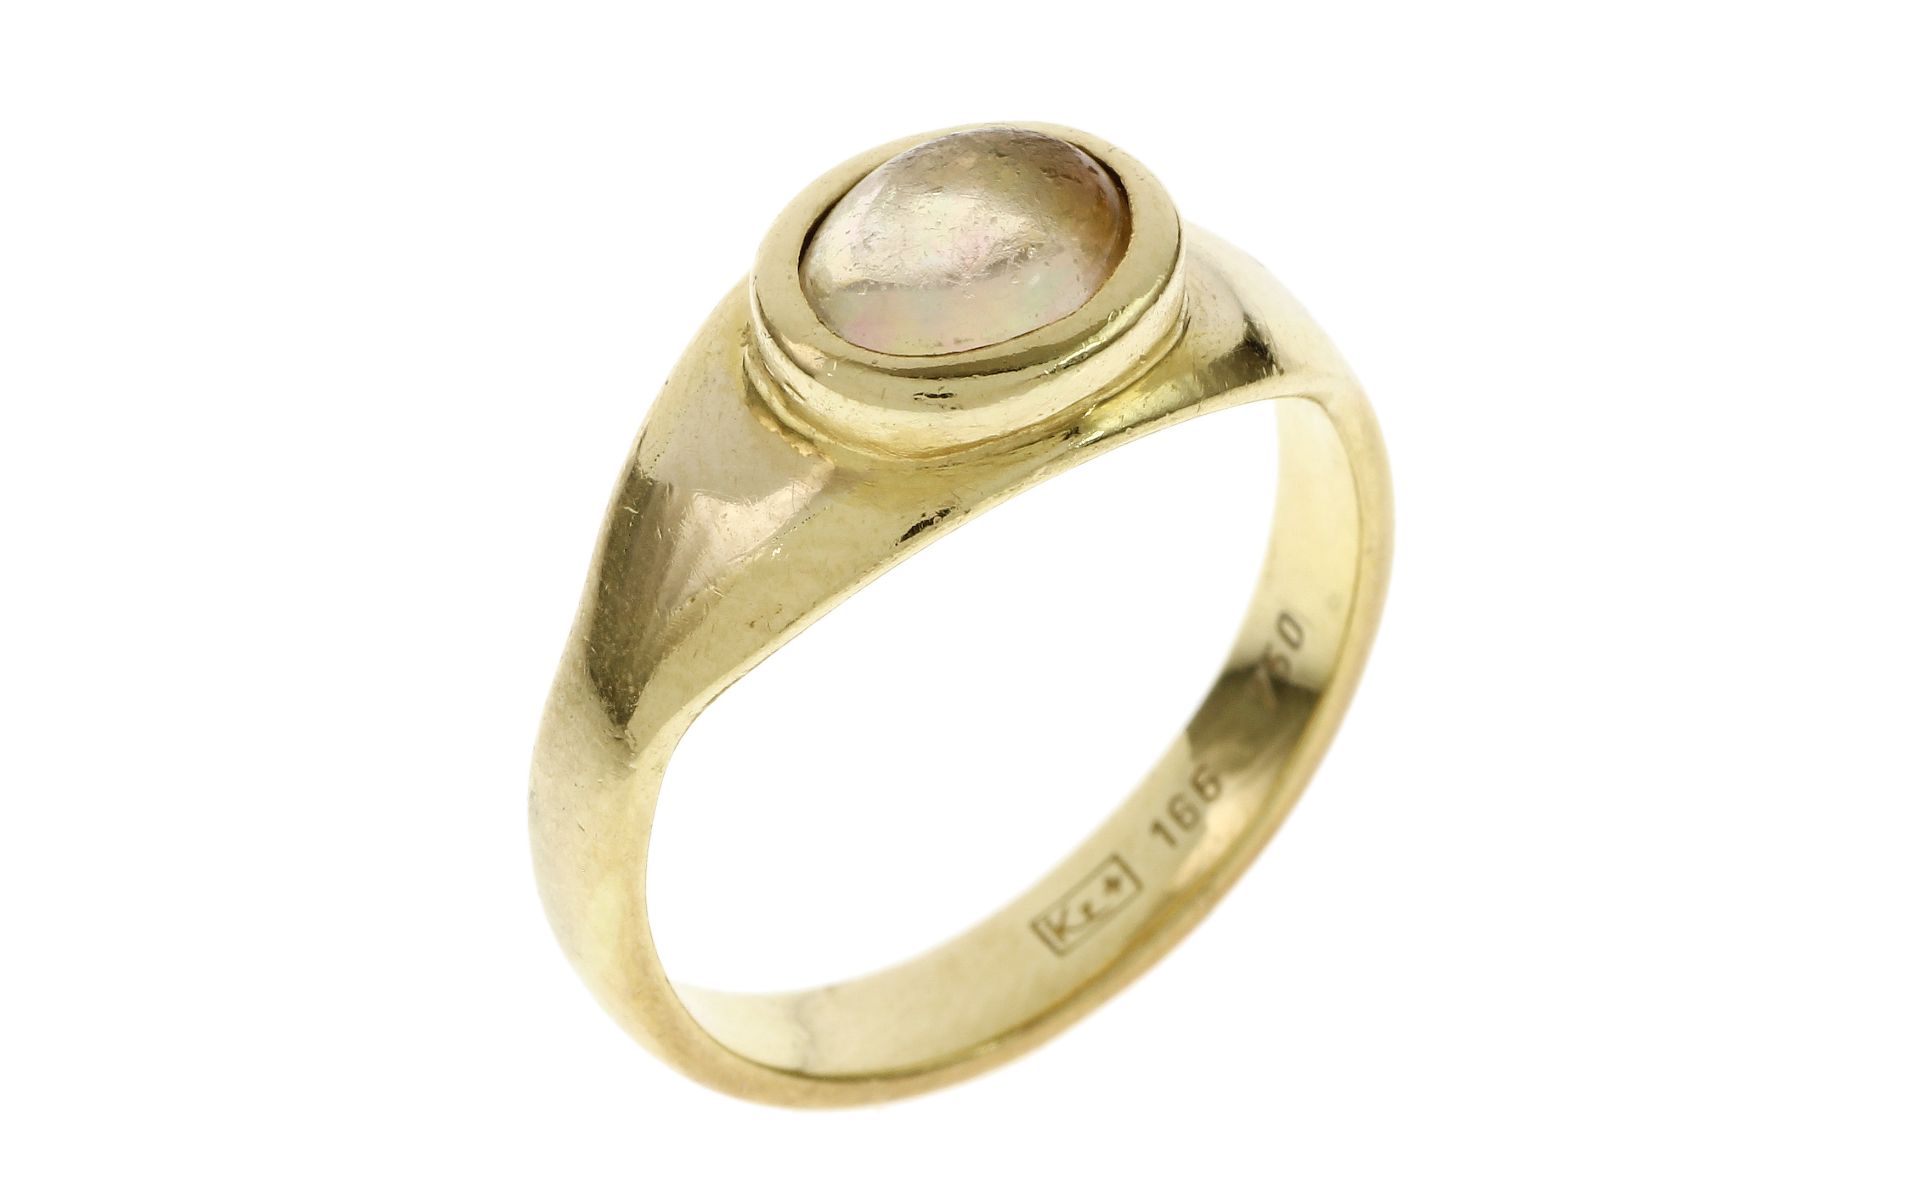 Ring 4.94g 750/- Gelbgold mit Opal. Ringgroesse ca. 56